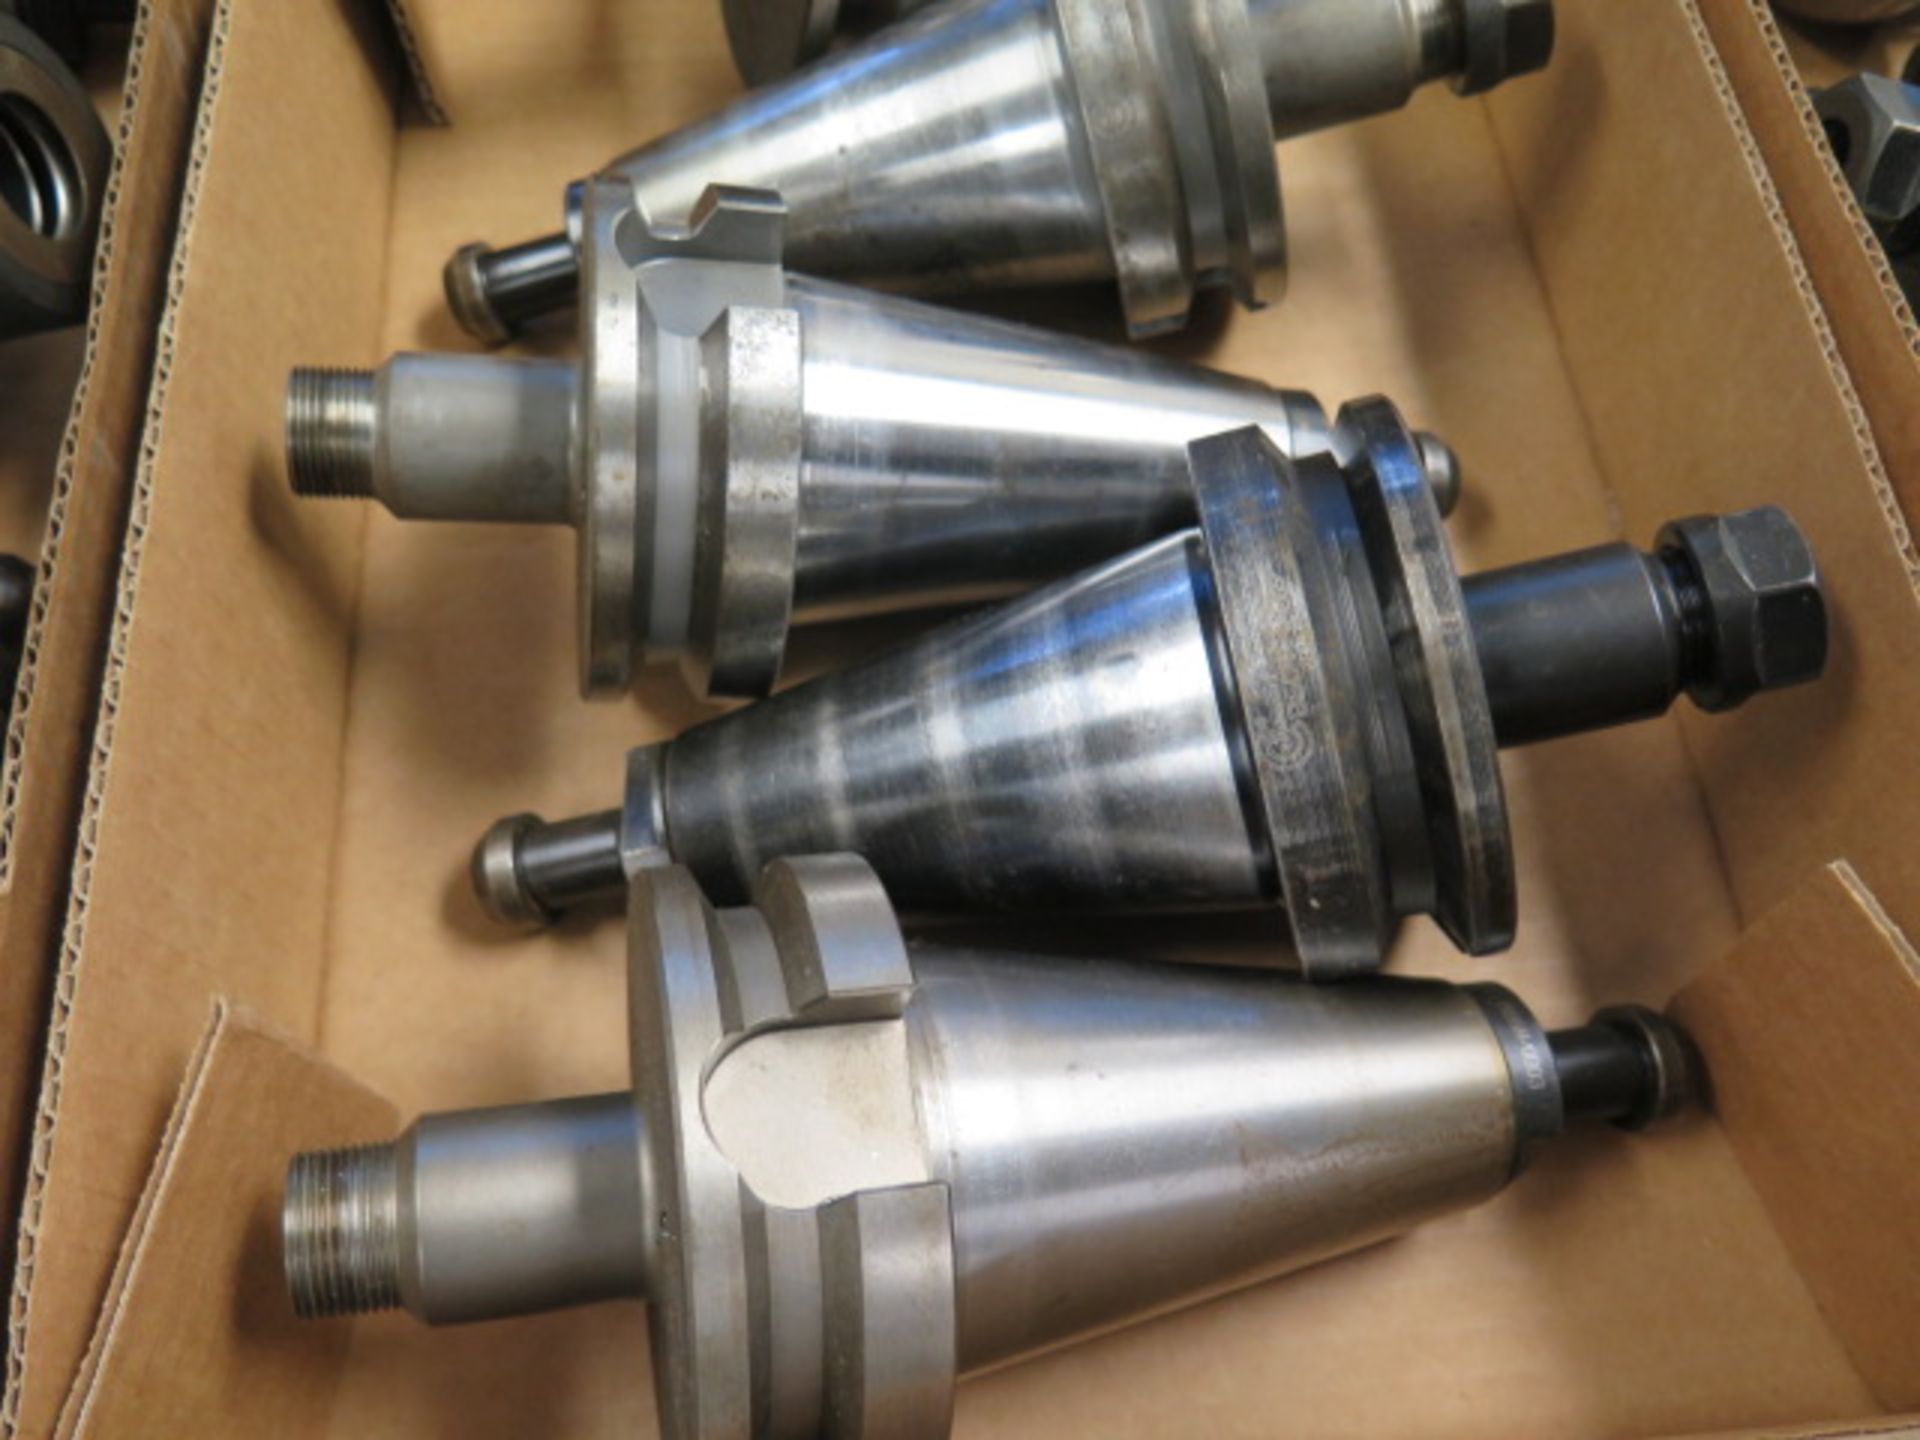 BT-50 Taper ER20 Collet Chucks (5) (SOLD AS-IS - NO WARRANTY) (Located @ 2229 Ringwood Ave. San Jose - Image 4 of 6